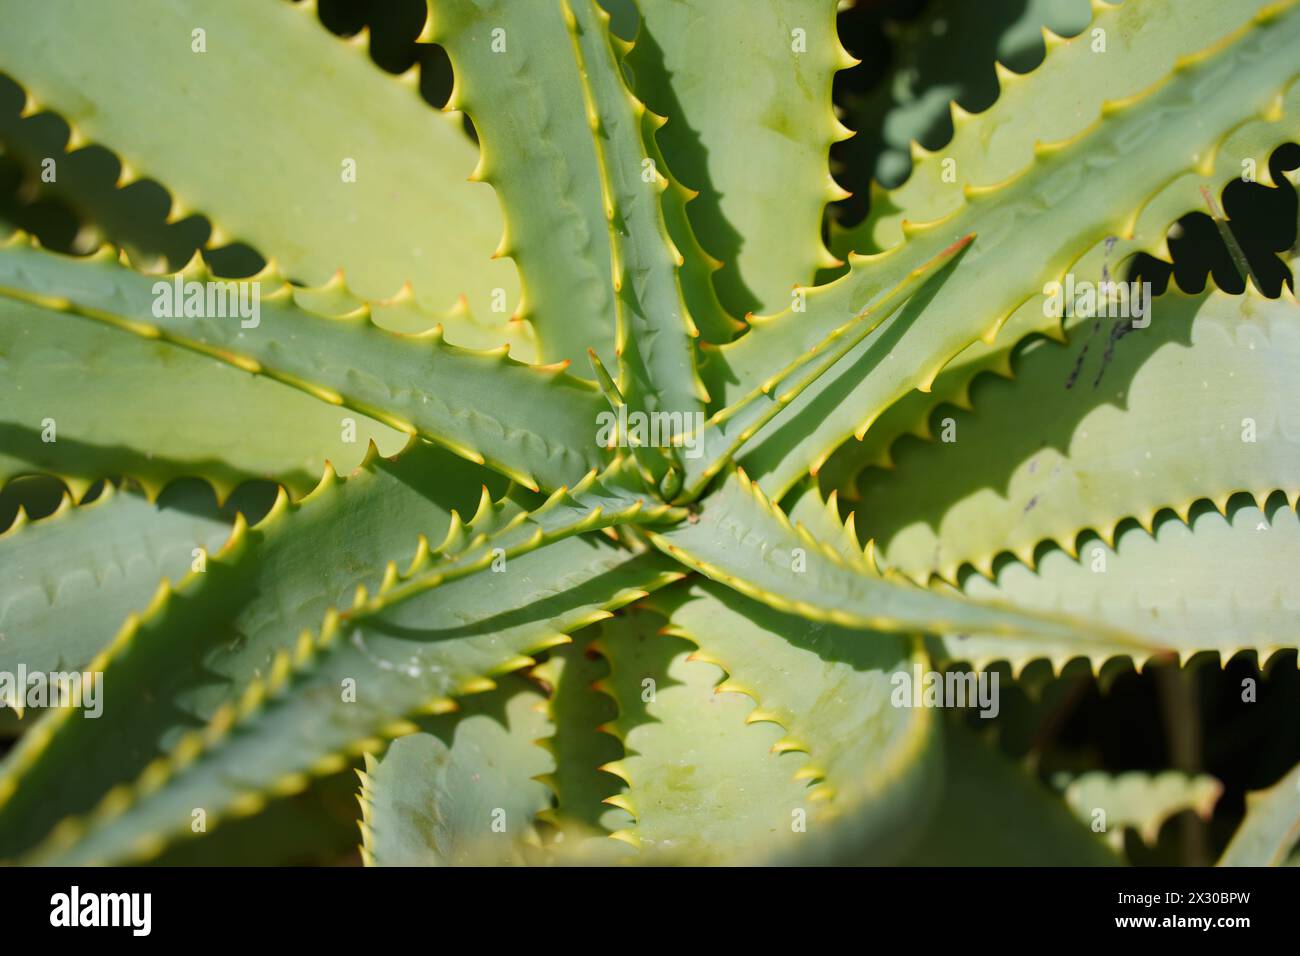 Aloe vera leaves tropical green plants tolerate hot weather during sunny day Stock Photo